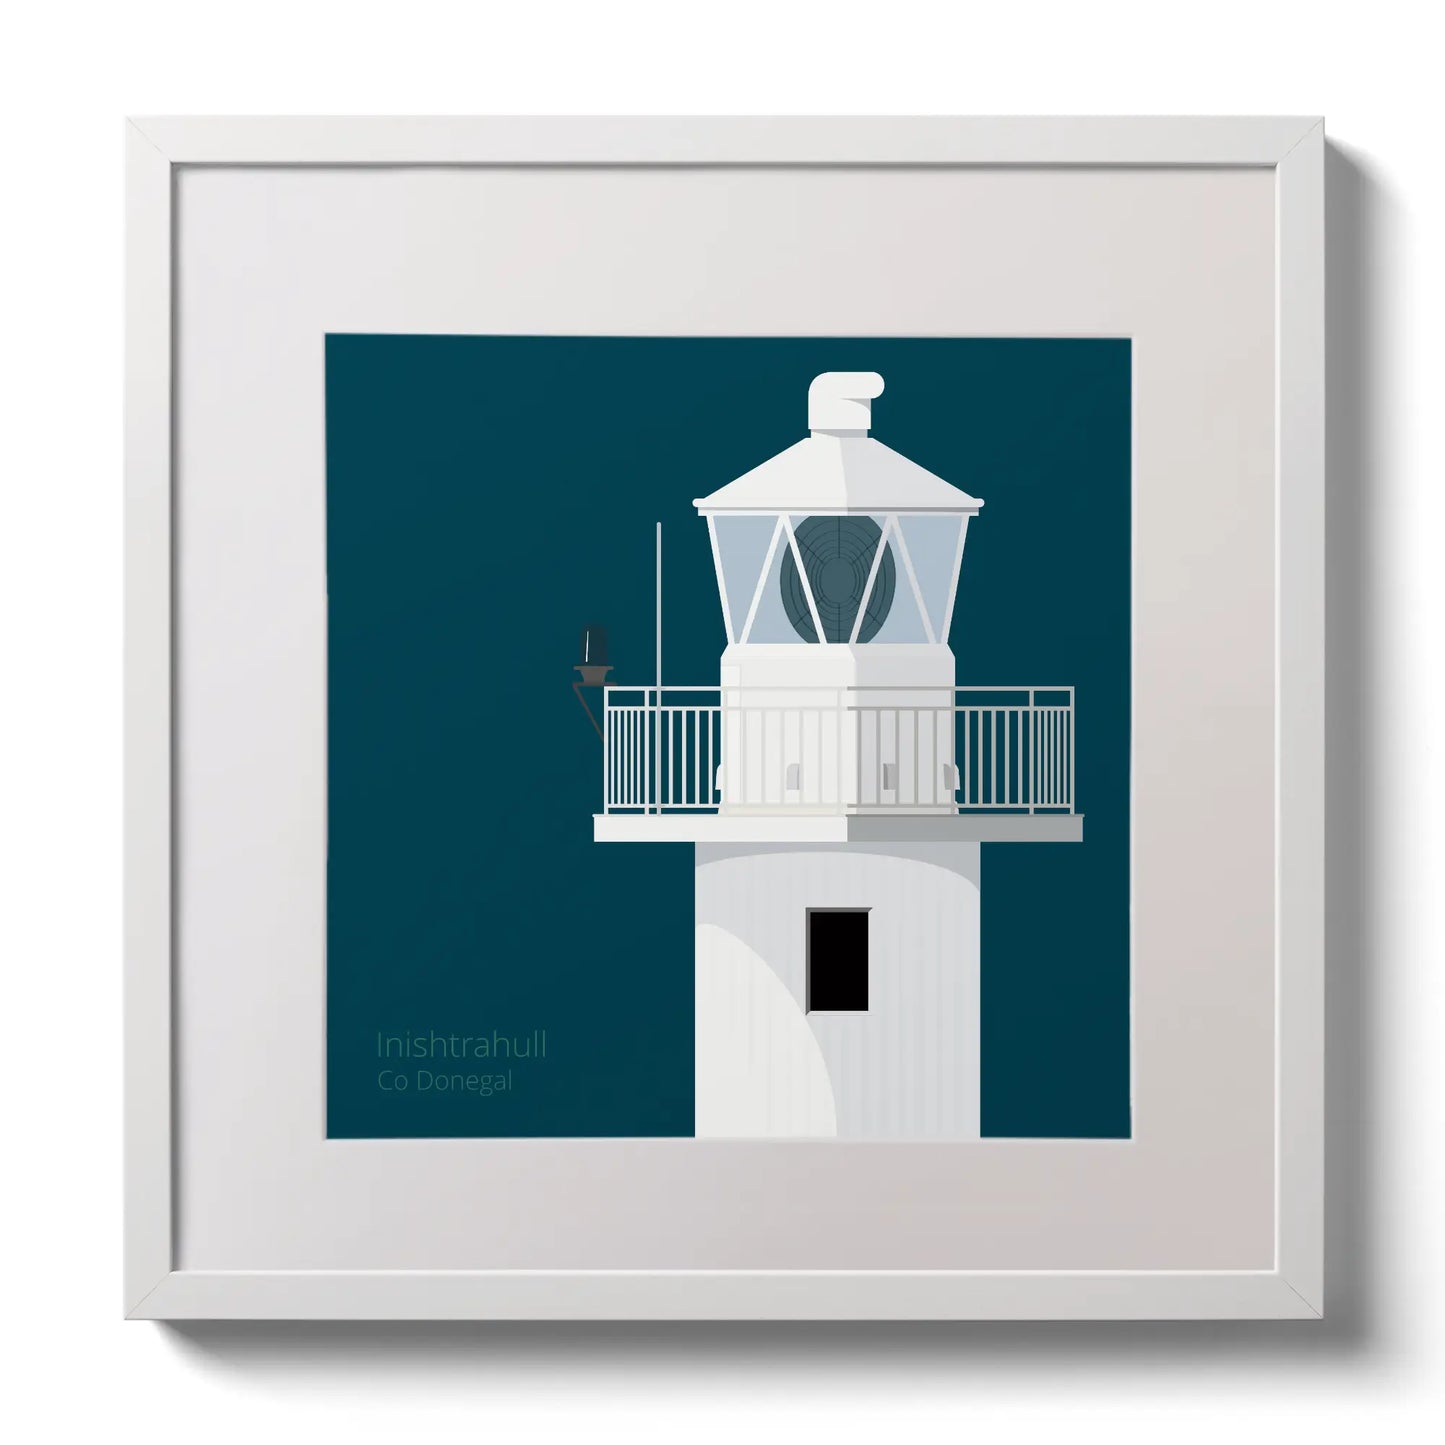 Illustration of Inishtrahull lighthouse on a midnight blue background,  in a white square frame measuring 30x30cm.